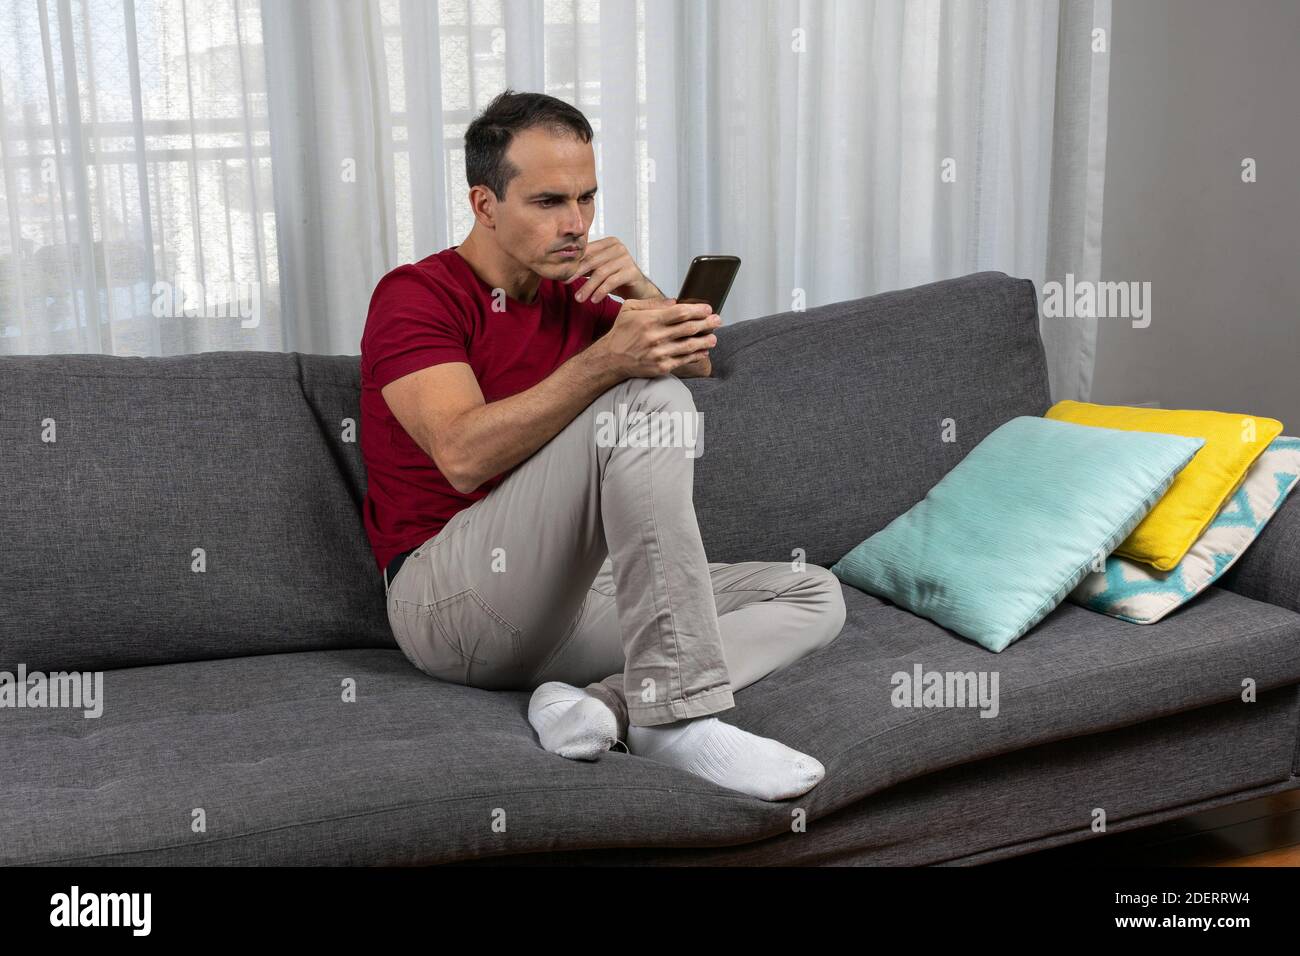 Mature man (44 years old) sitting on the couch with his socks on and fiddling with his smartphone. Stock Photo